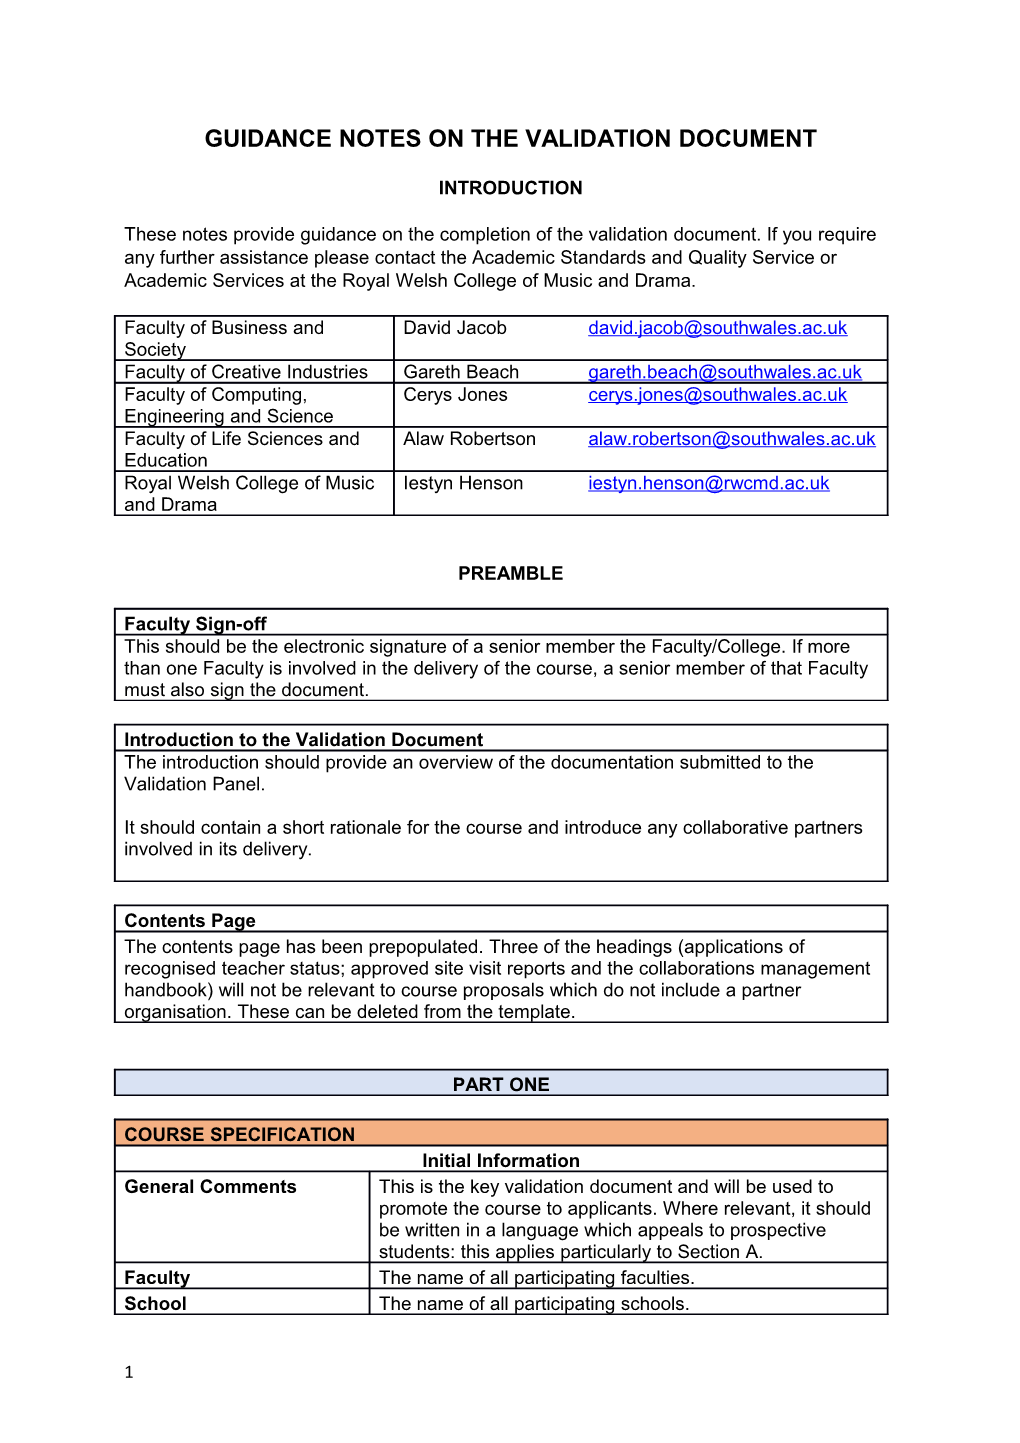 Guidance Notes on the Validation Document